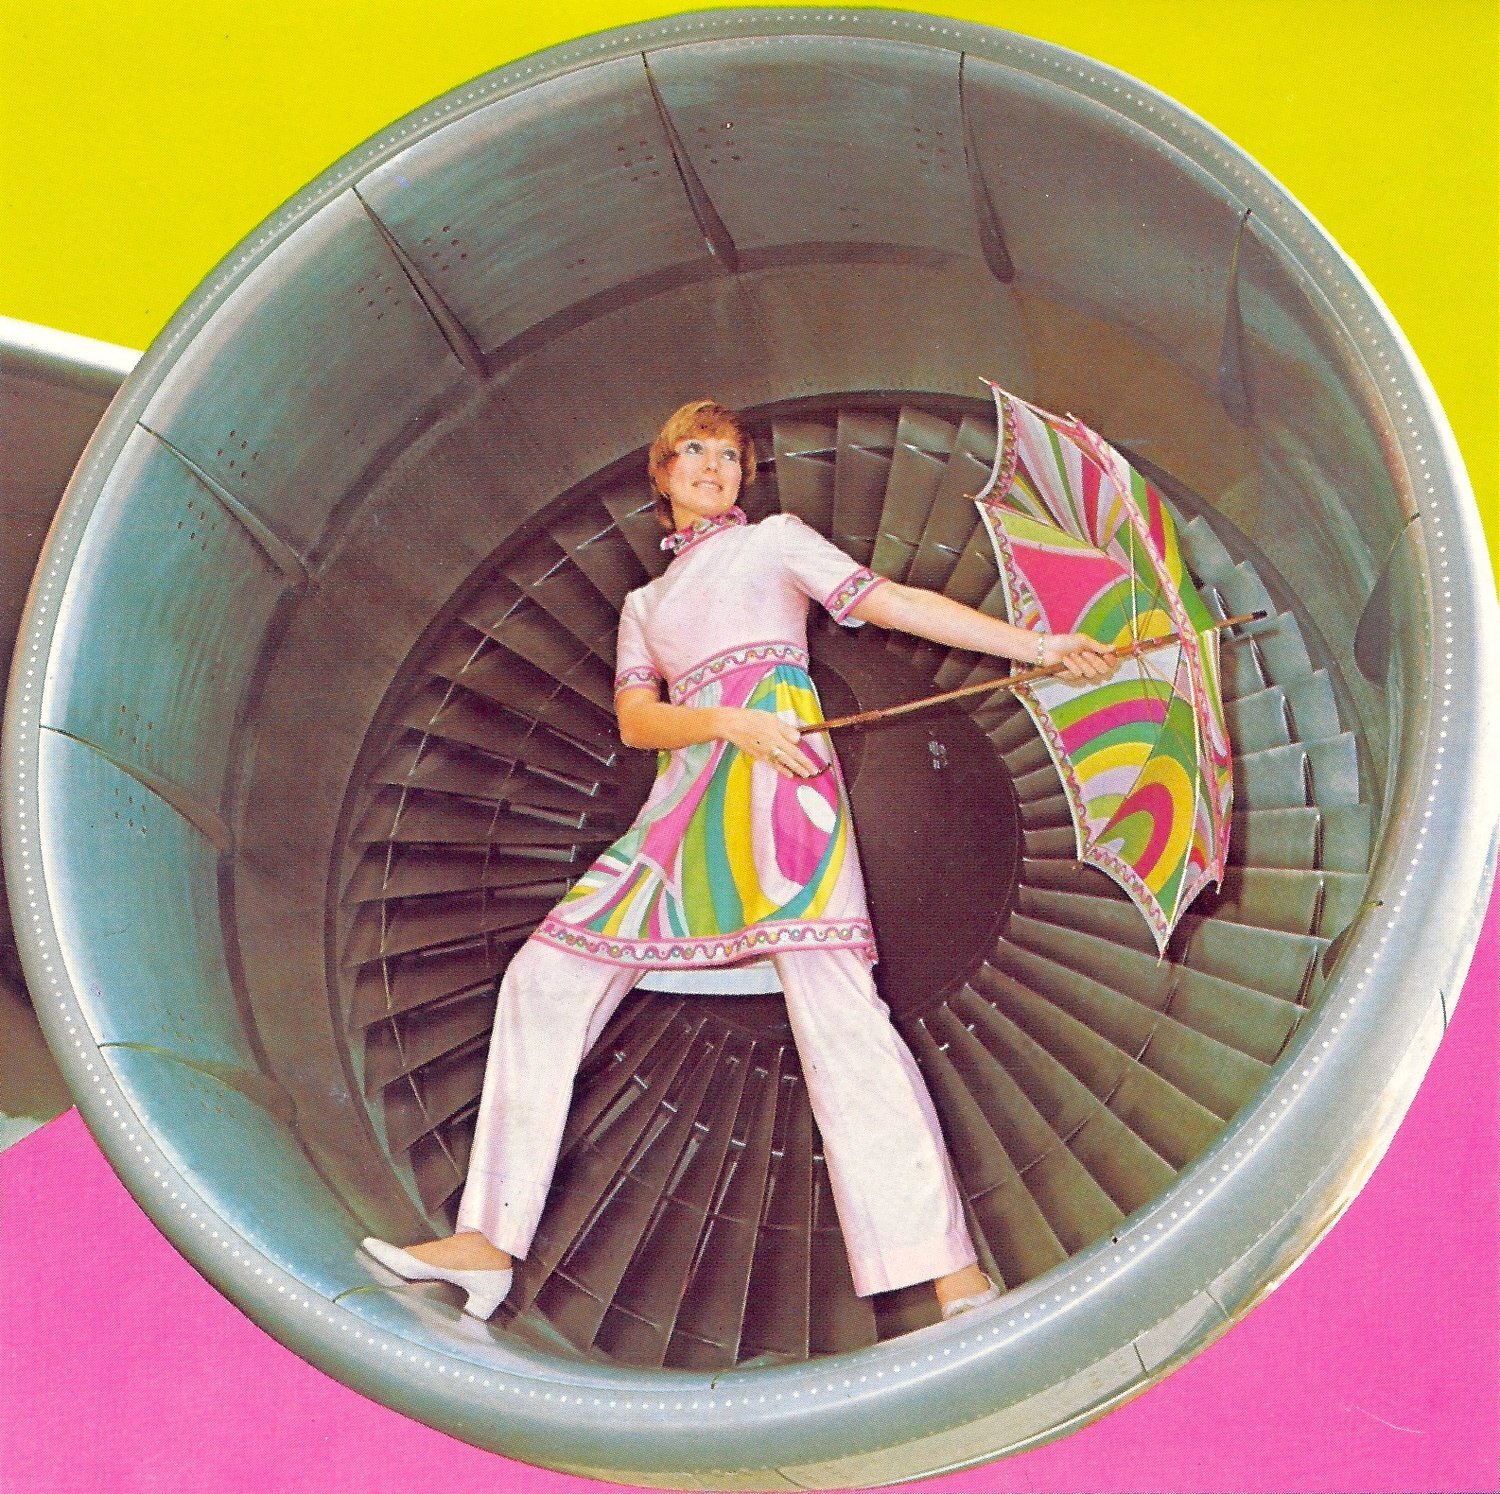 BI+747+Braniff+Place+Hostess+In+Engine+Pucci+1971+Pant+Dress+Collection+Umbrella+1970+Annual+Report+2.jpg